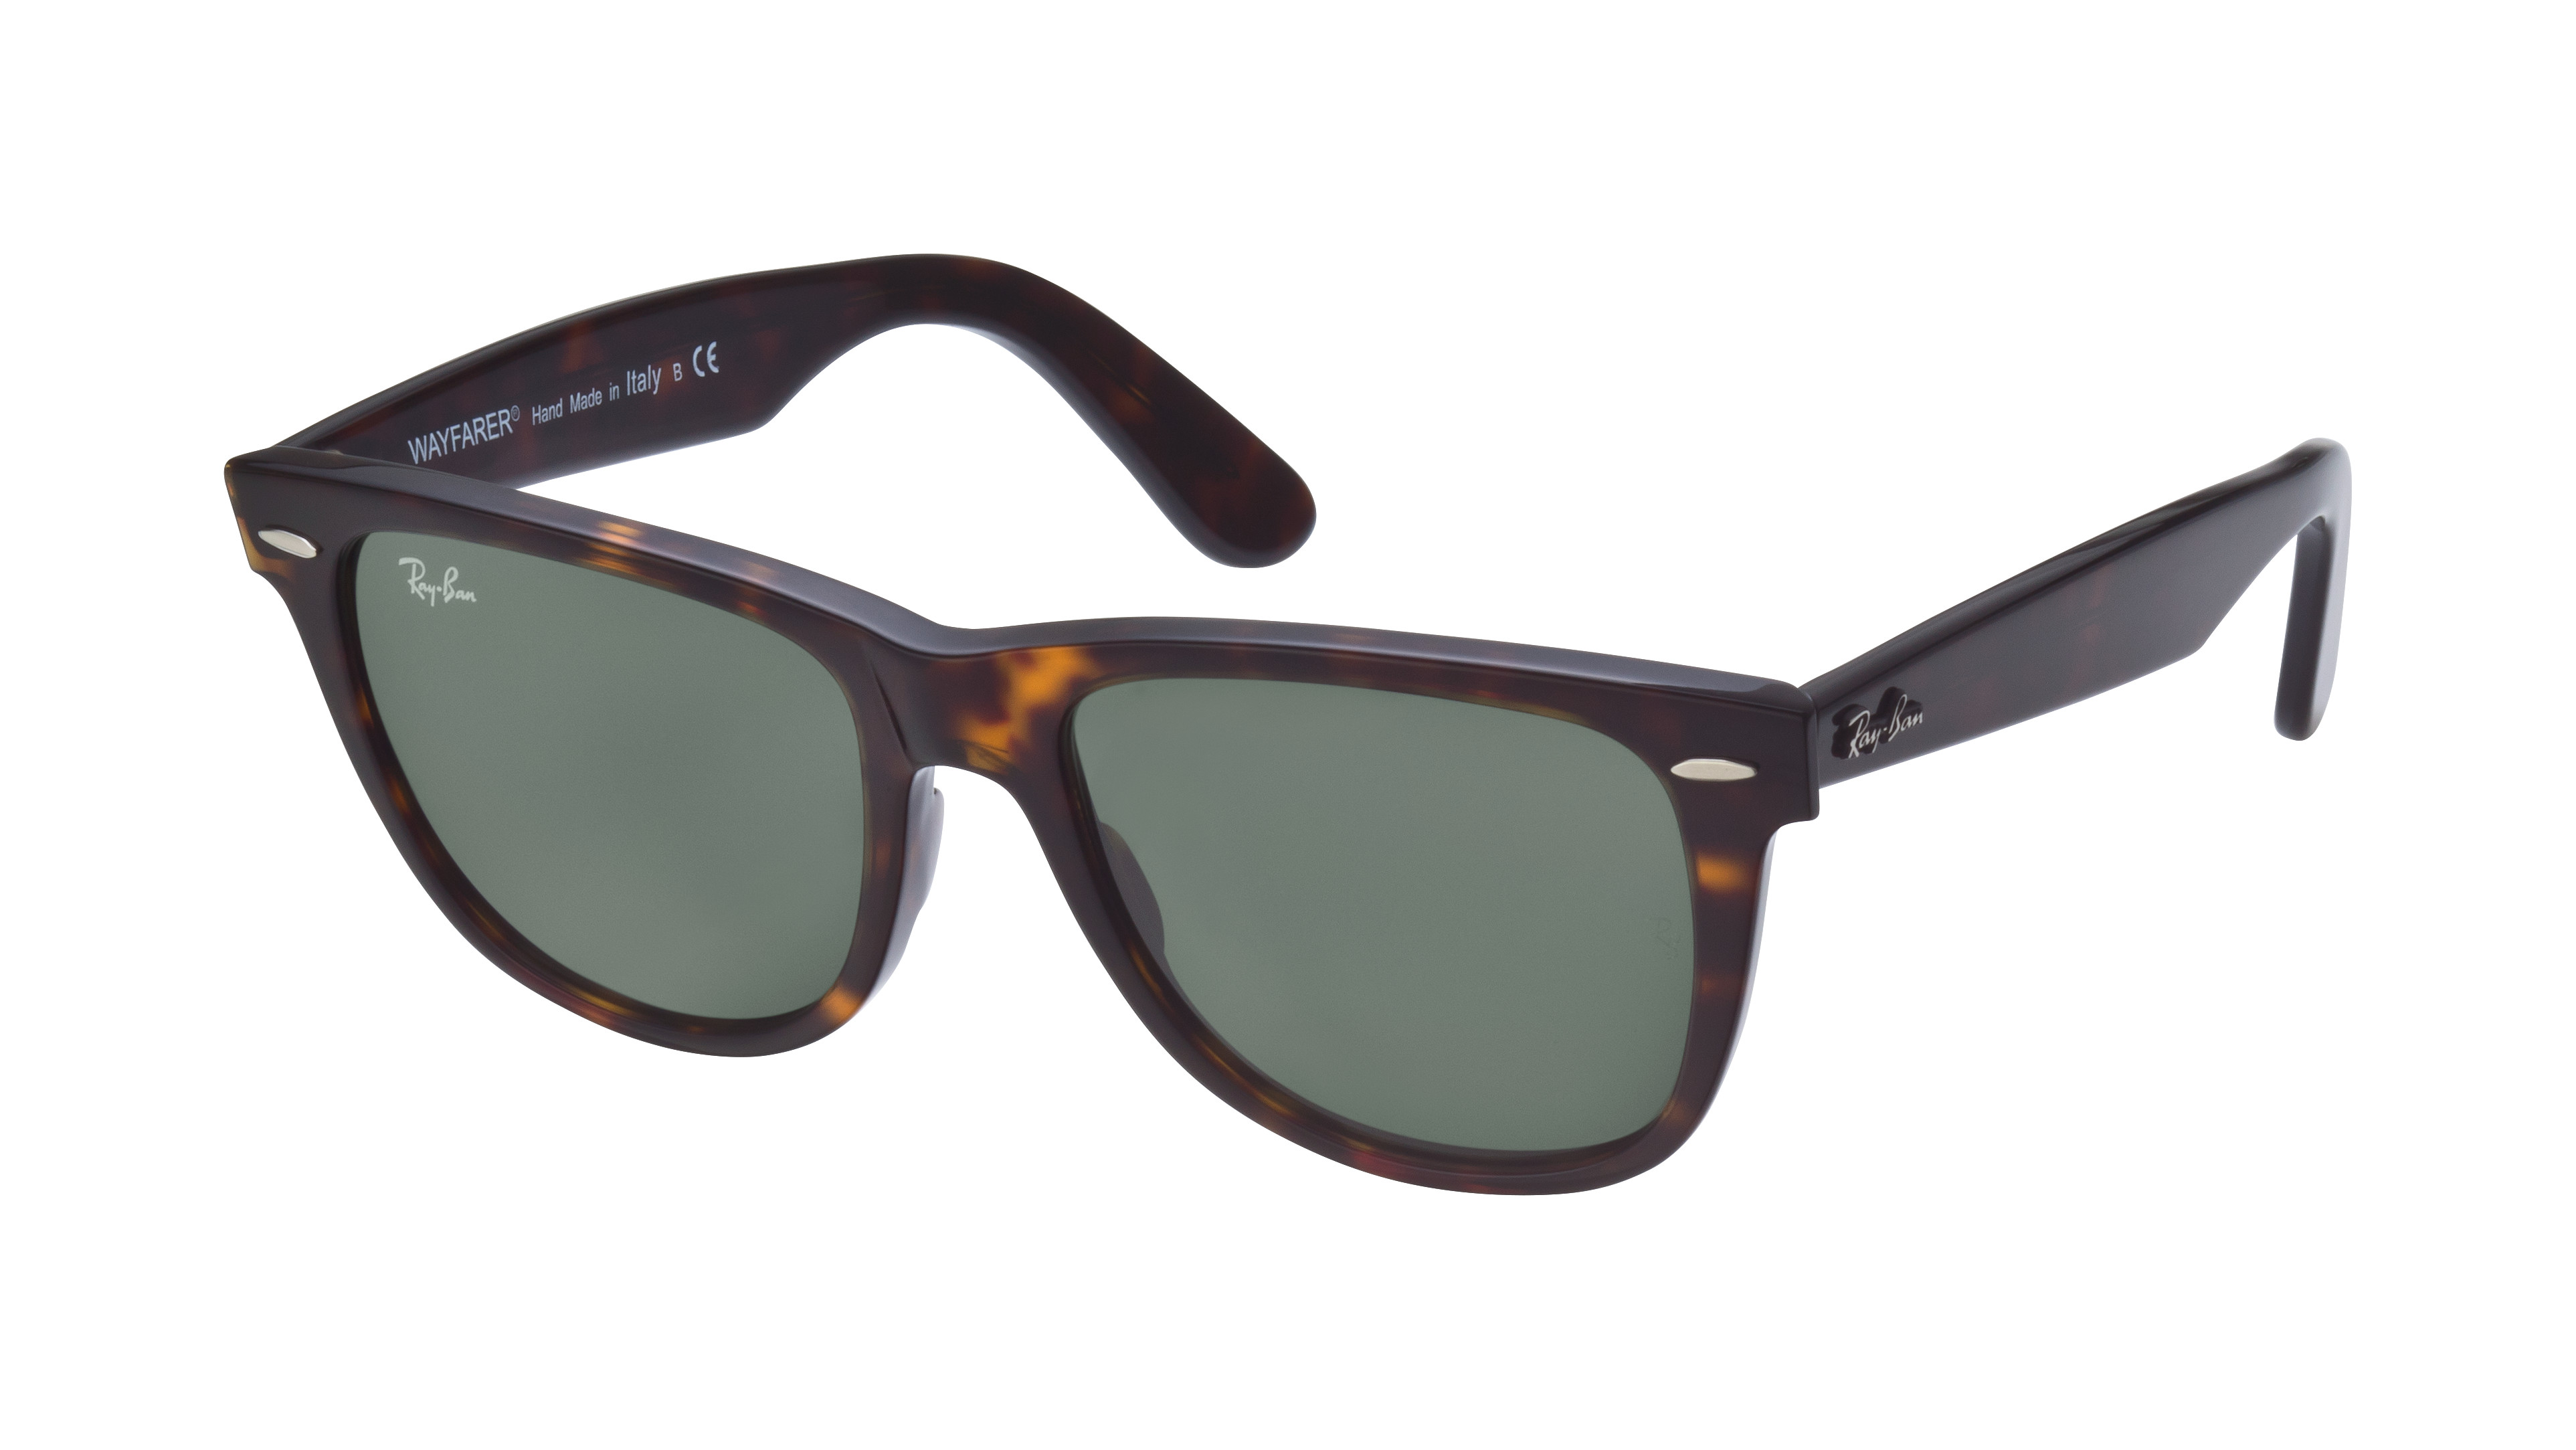 [products.image.angle_left01] Ray-Ban Wayfarer 0RB2140 902 Sonnenbrille